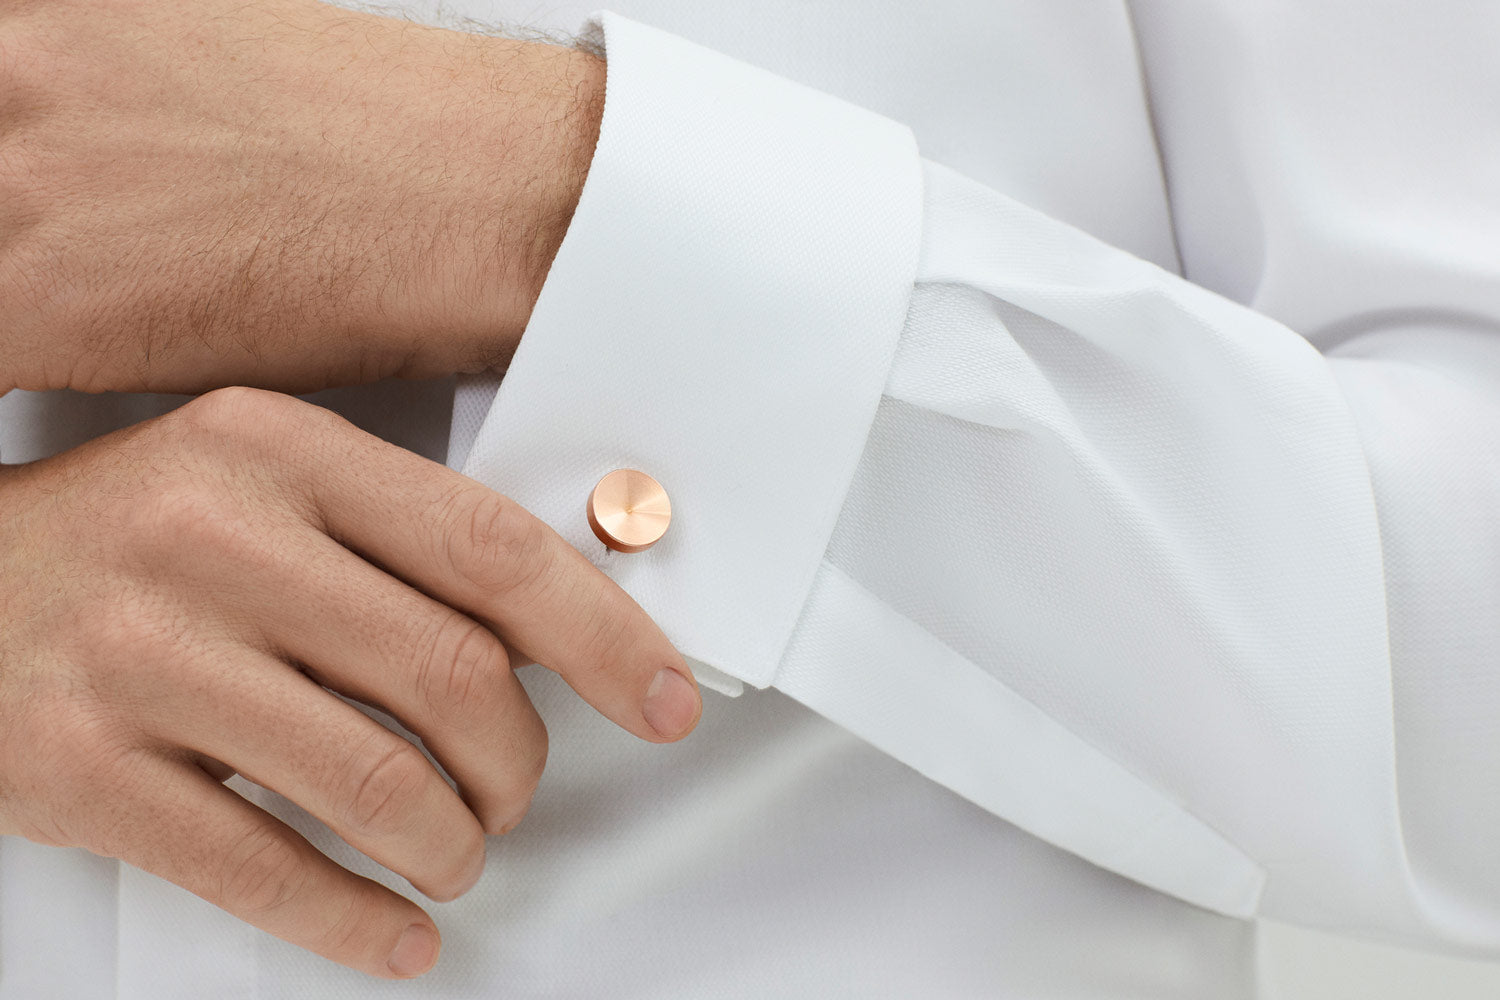 copper cufflinks for work | Alice Made This